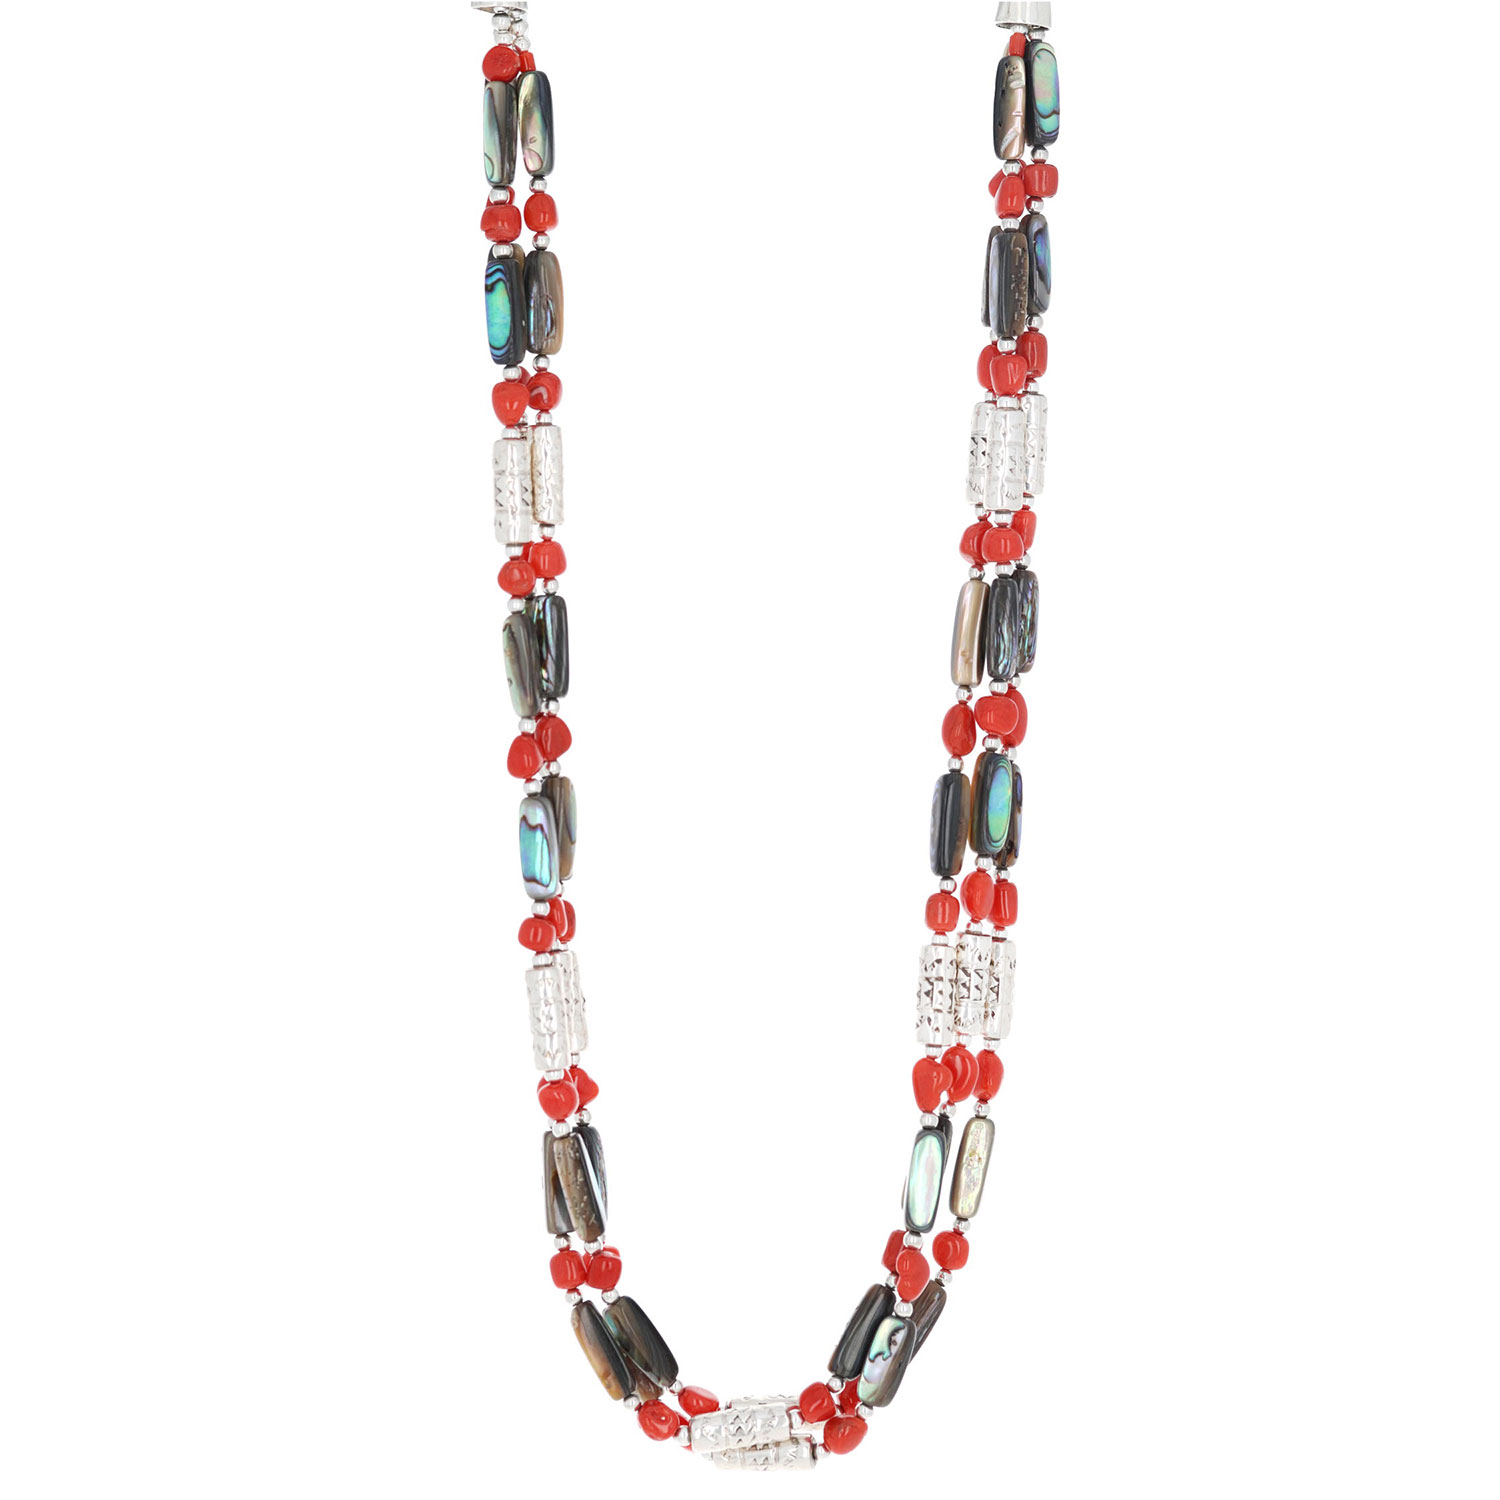 Coral and Abalone Barrel Bead Necklace - Malouf on the Plaza